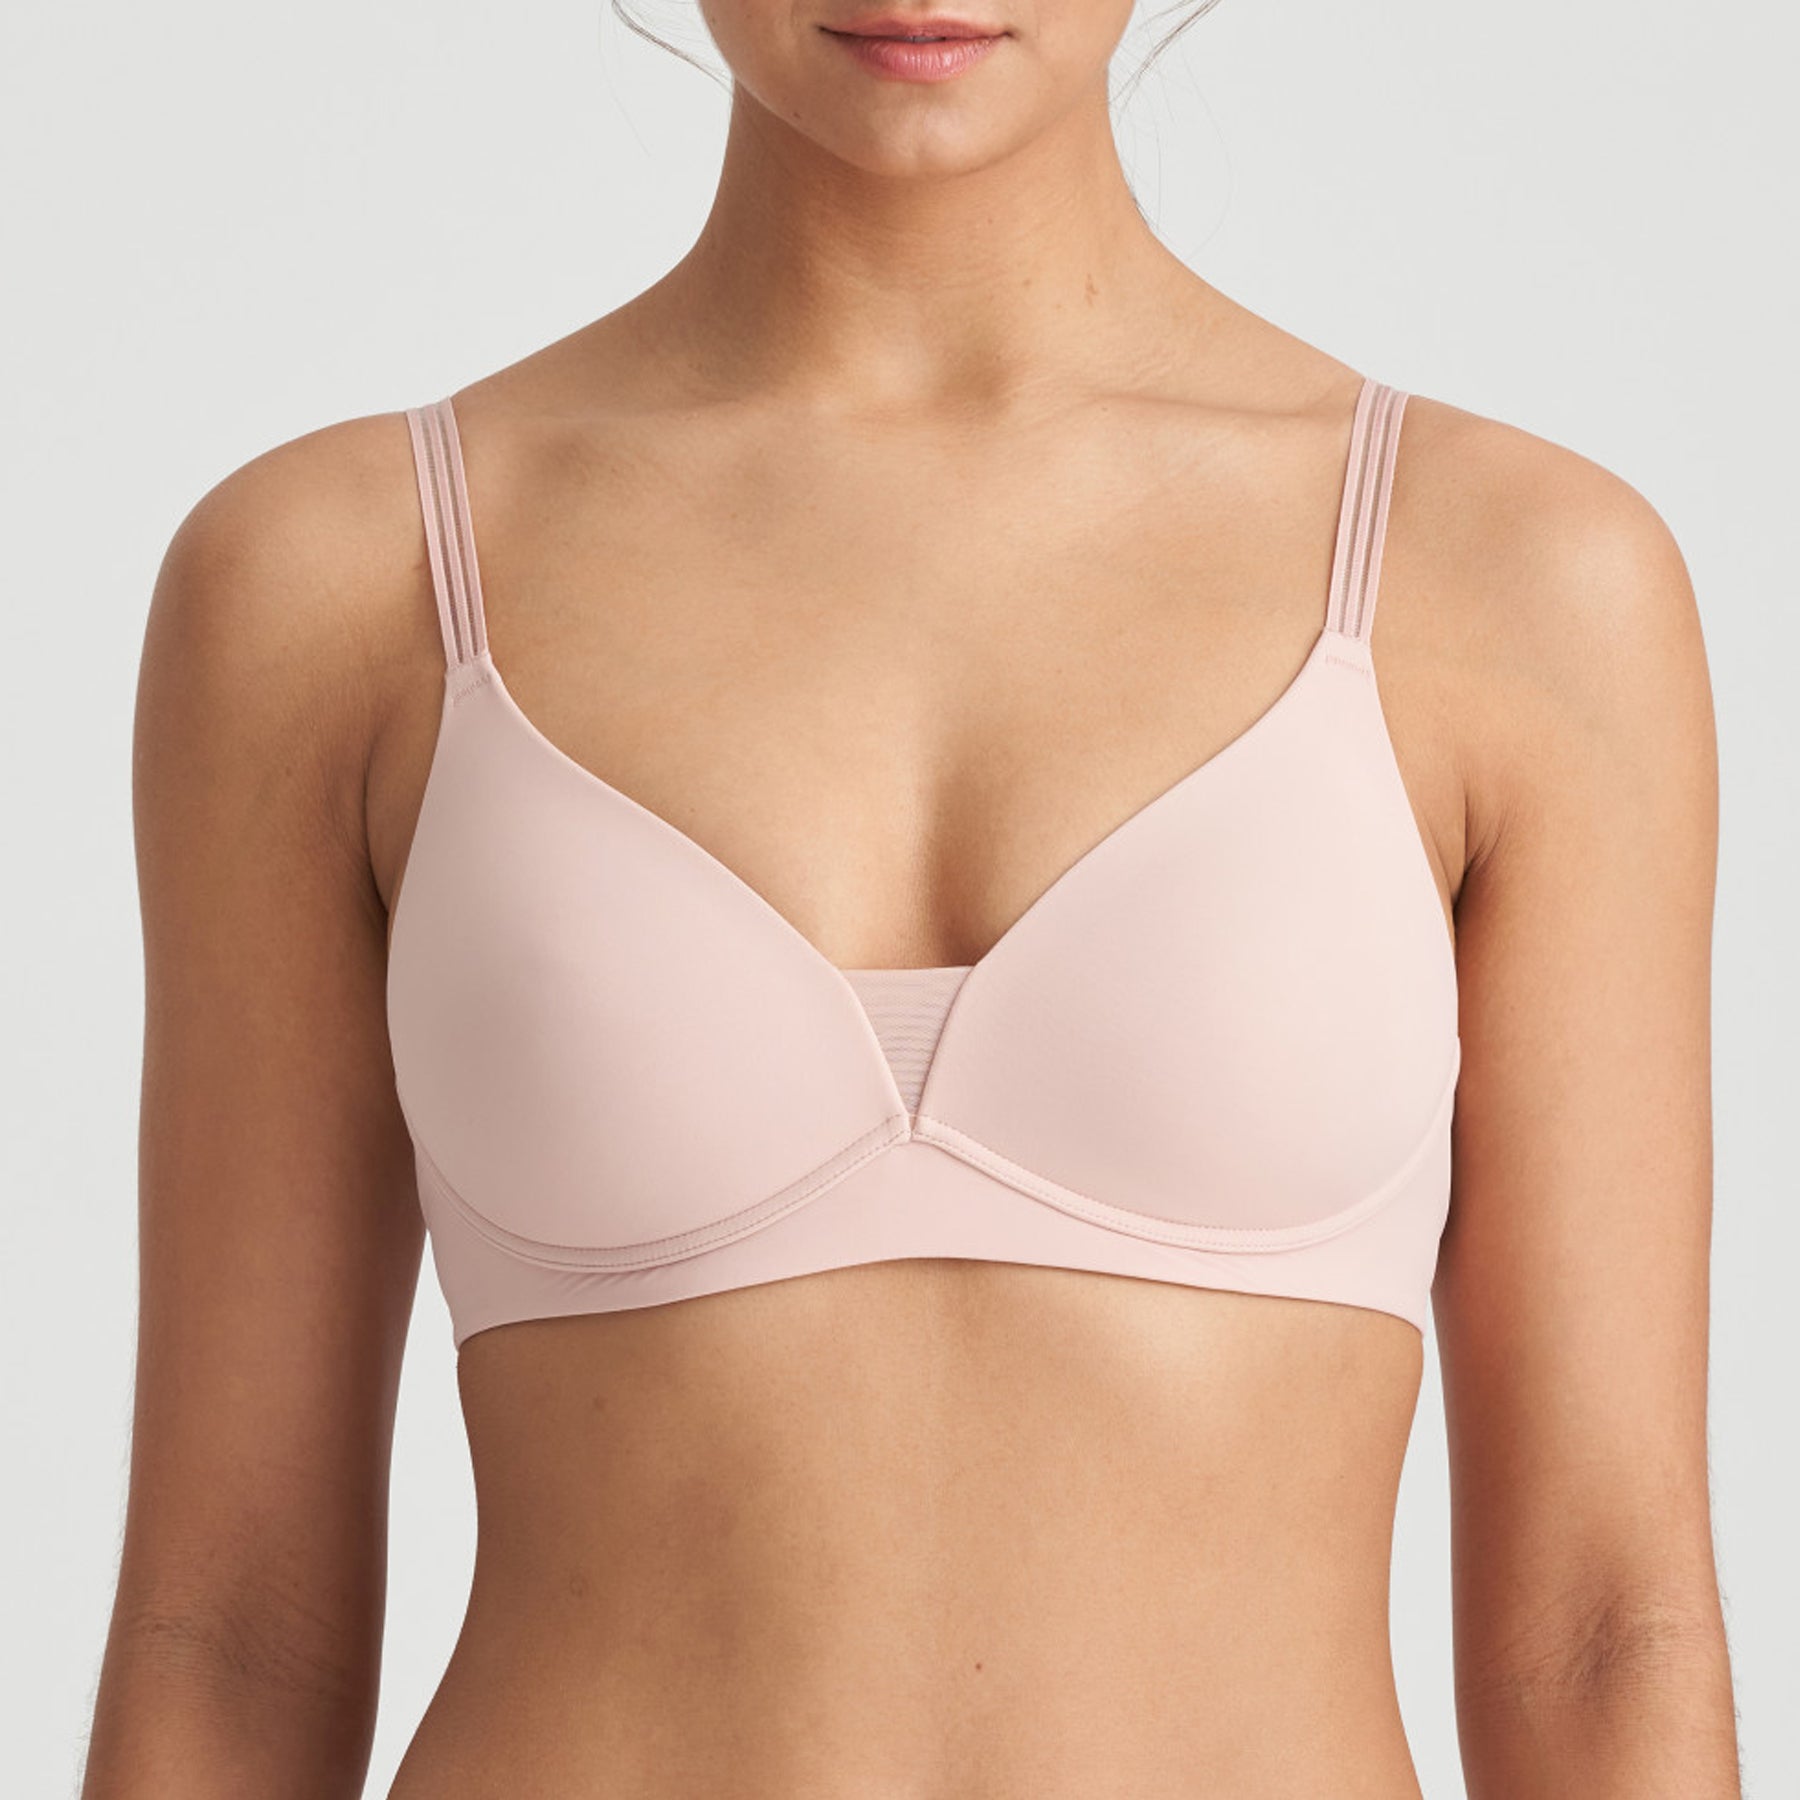 Best Sellers: The most popular items in Women's Everyday Bras